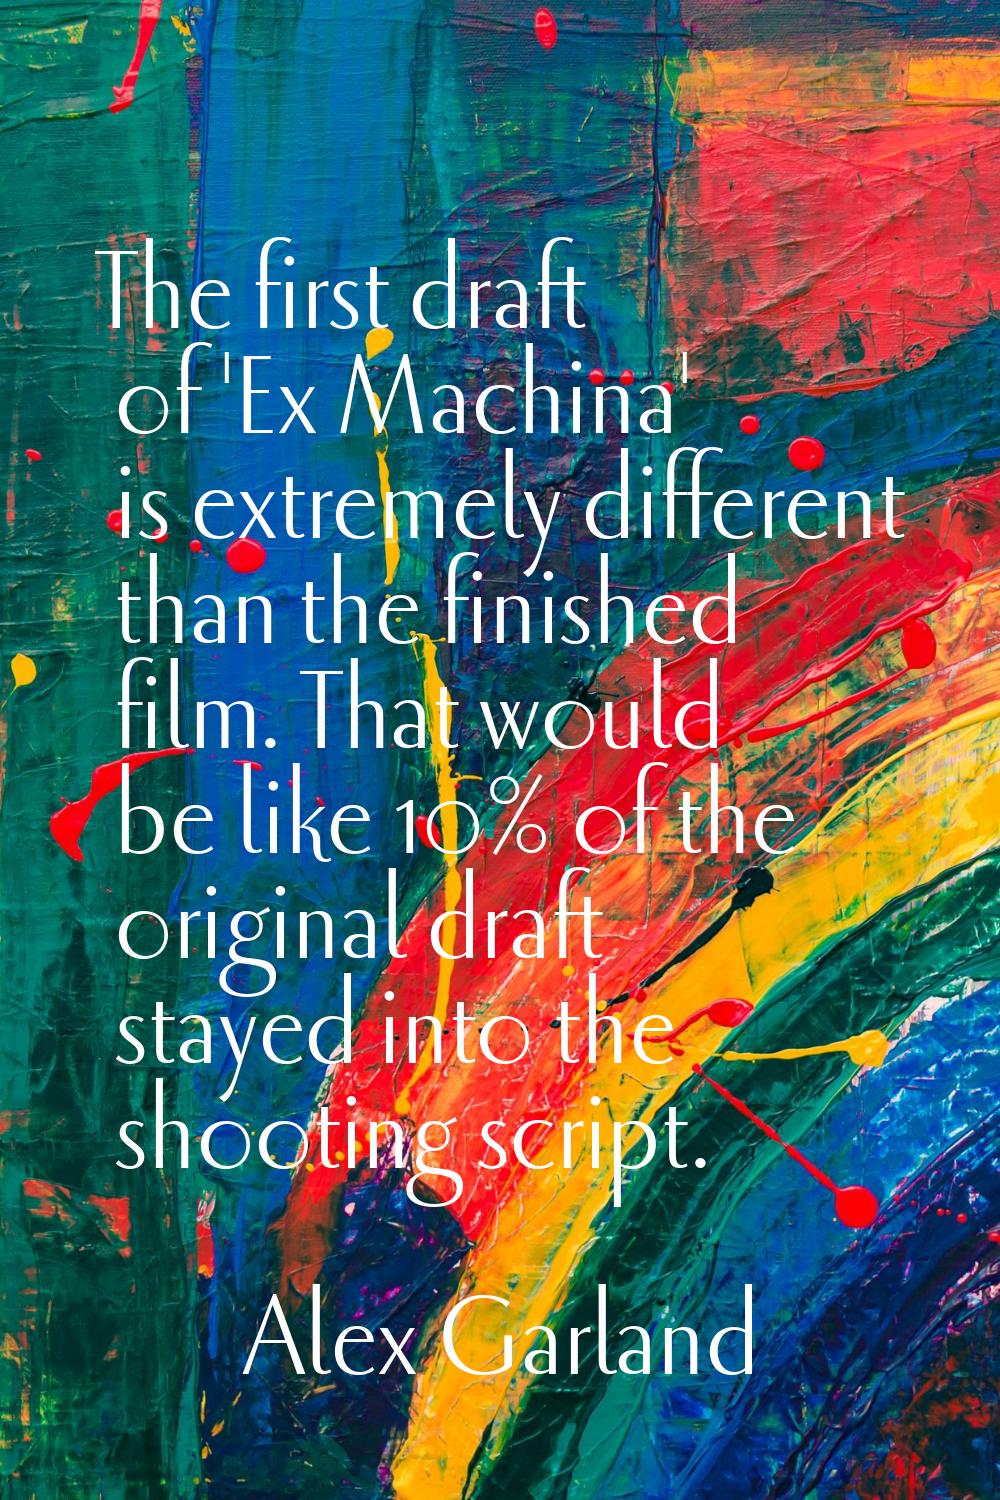 The first draft of 'Ex Machina' is extremely different than the finished film. That would be like 1